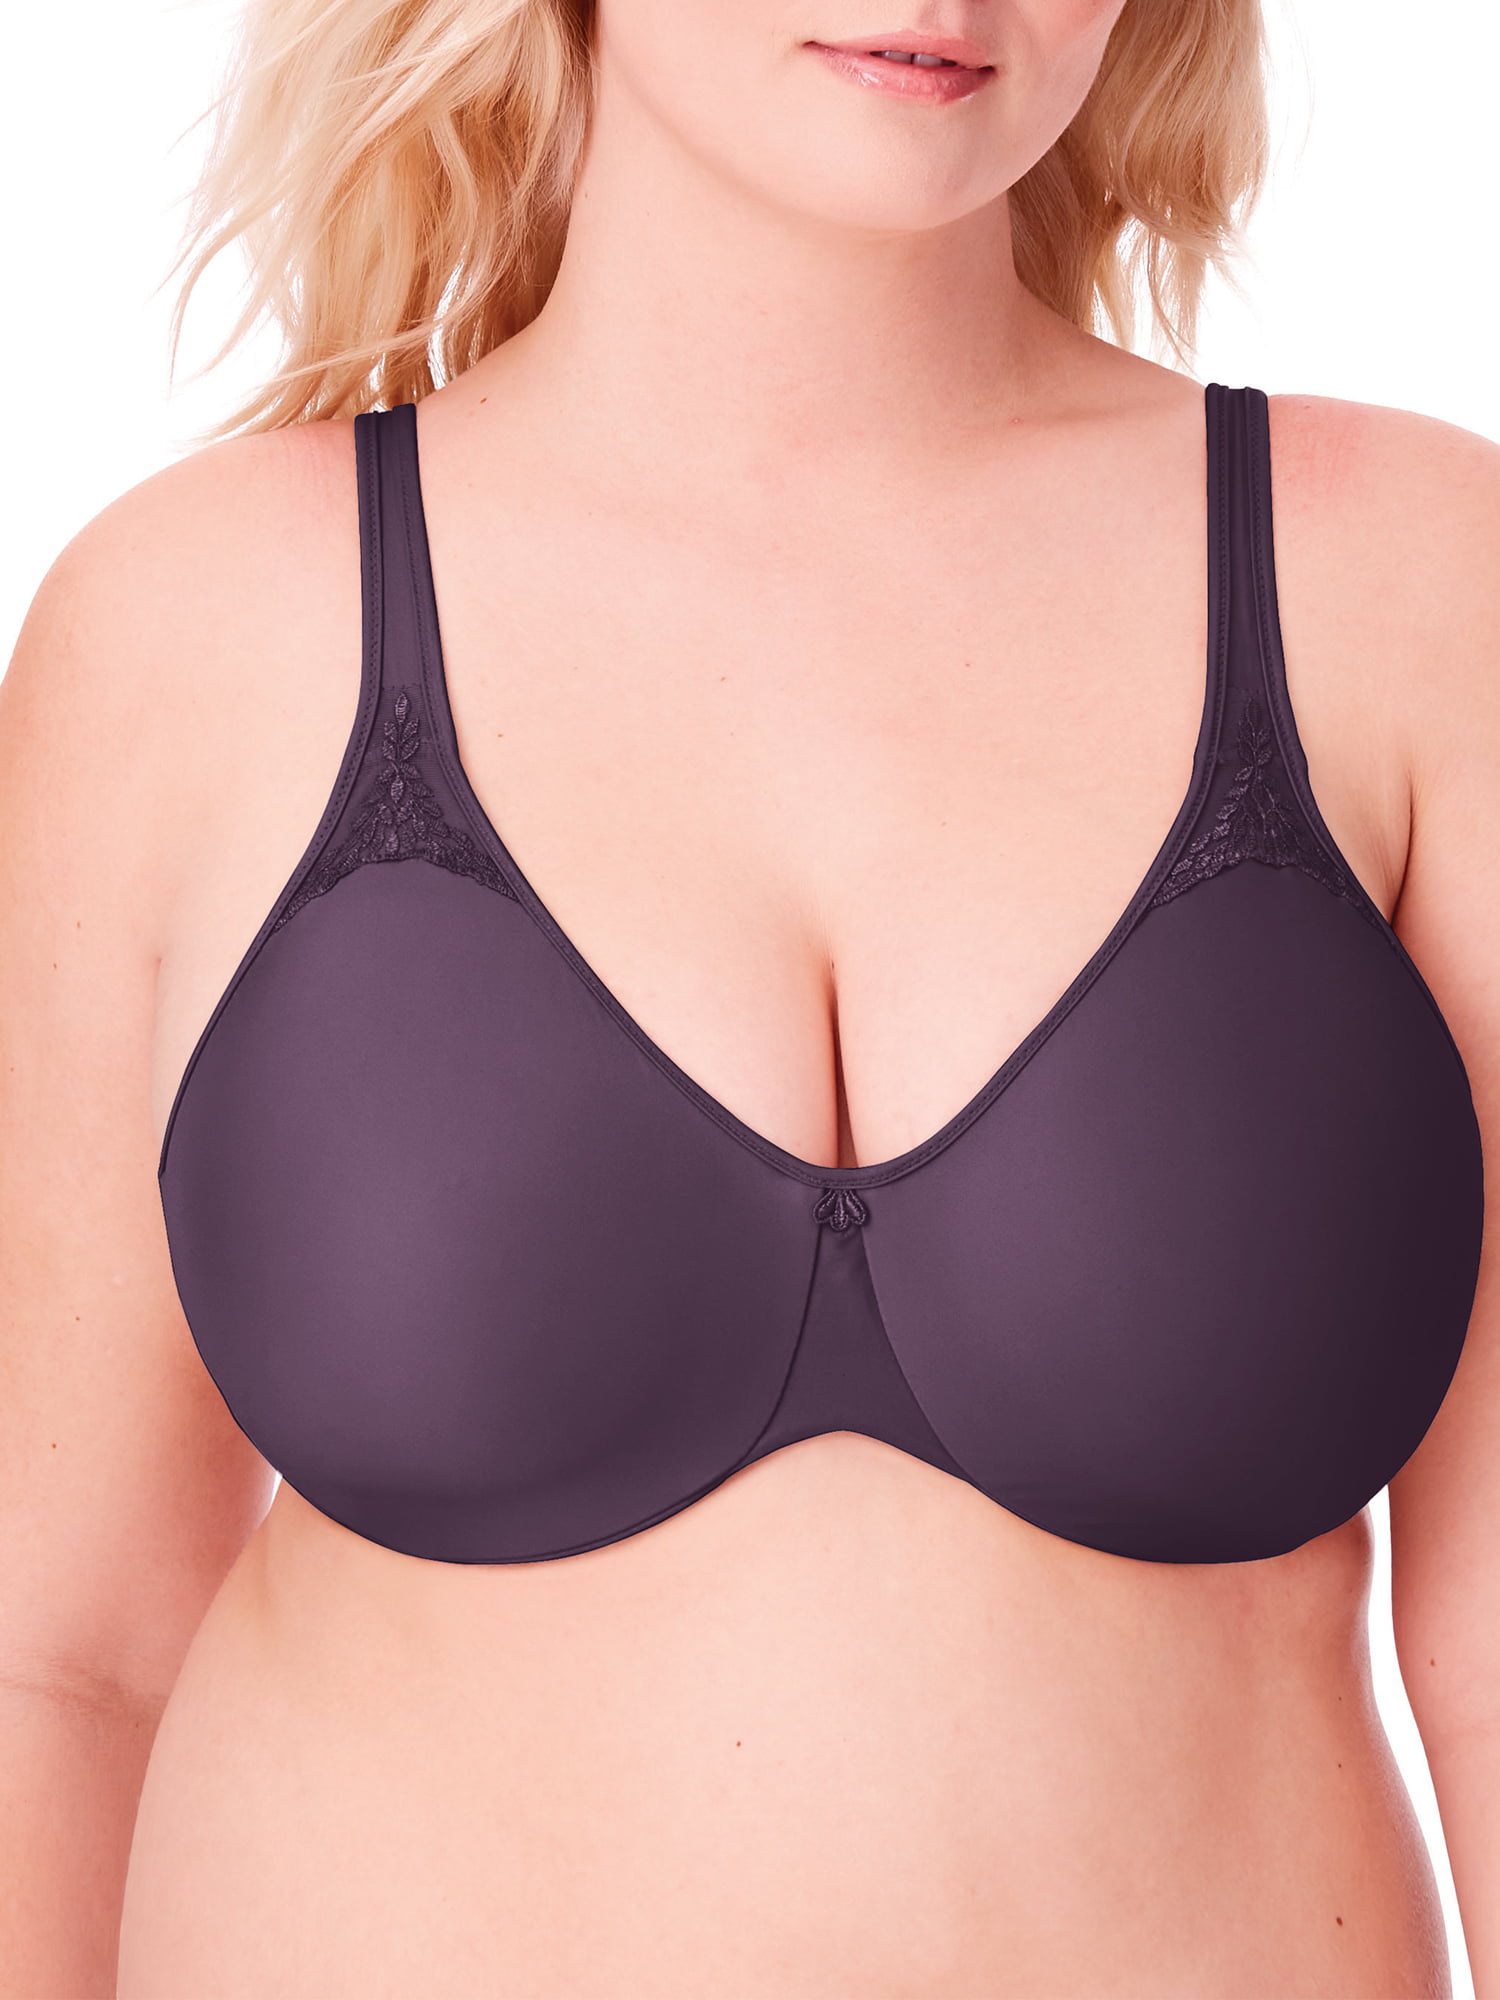 The Passion For Comfort® Minimizer Underwire Bra minimizes up to 1.5 inches  to provide a smooth look under tops and dresses.